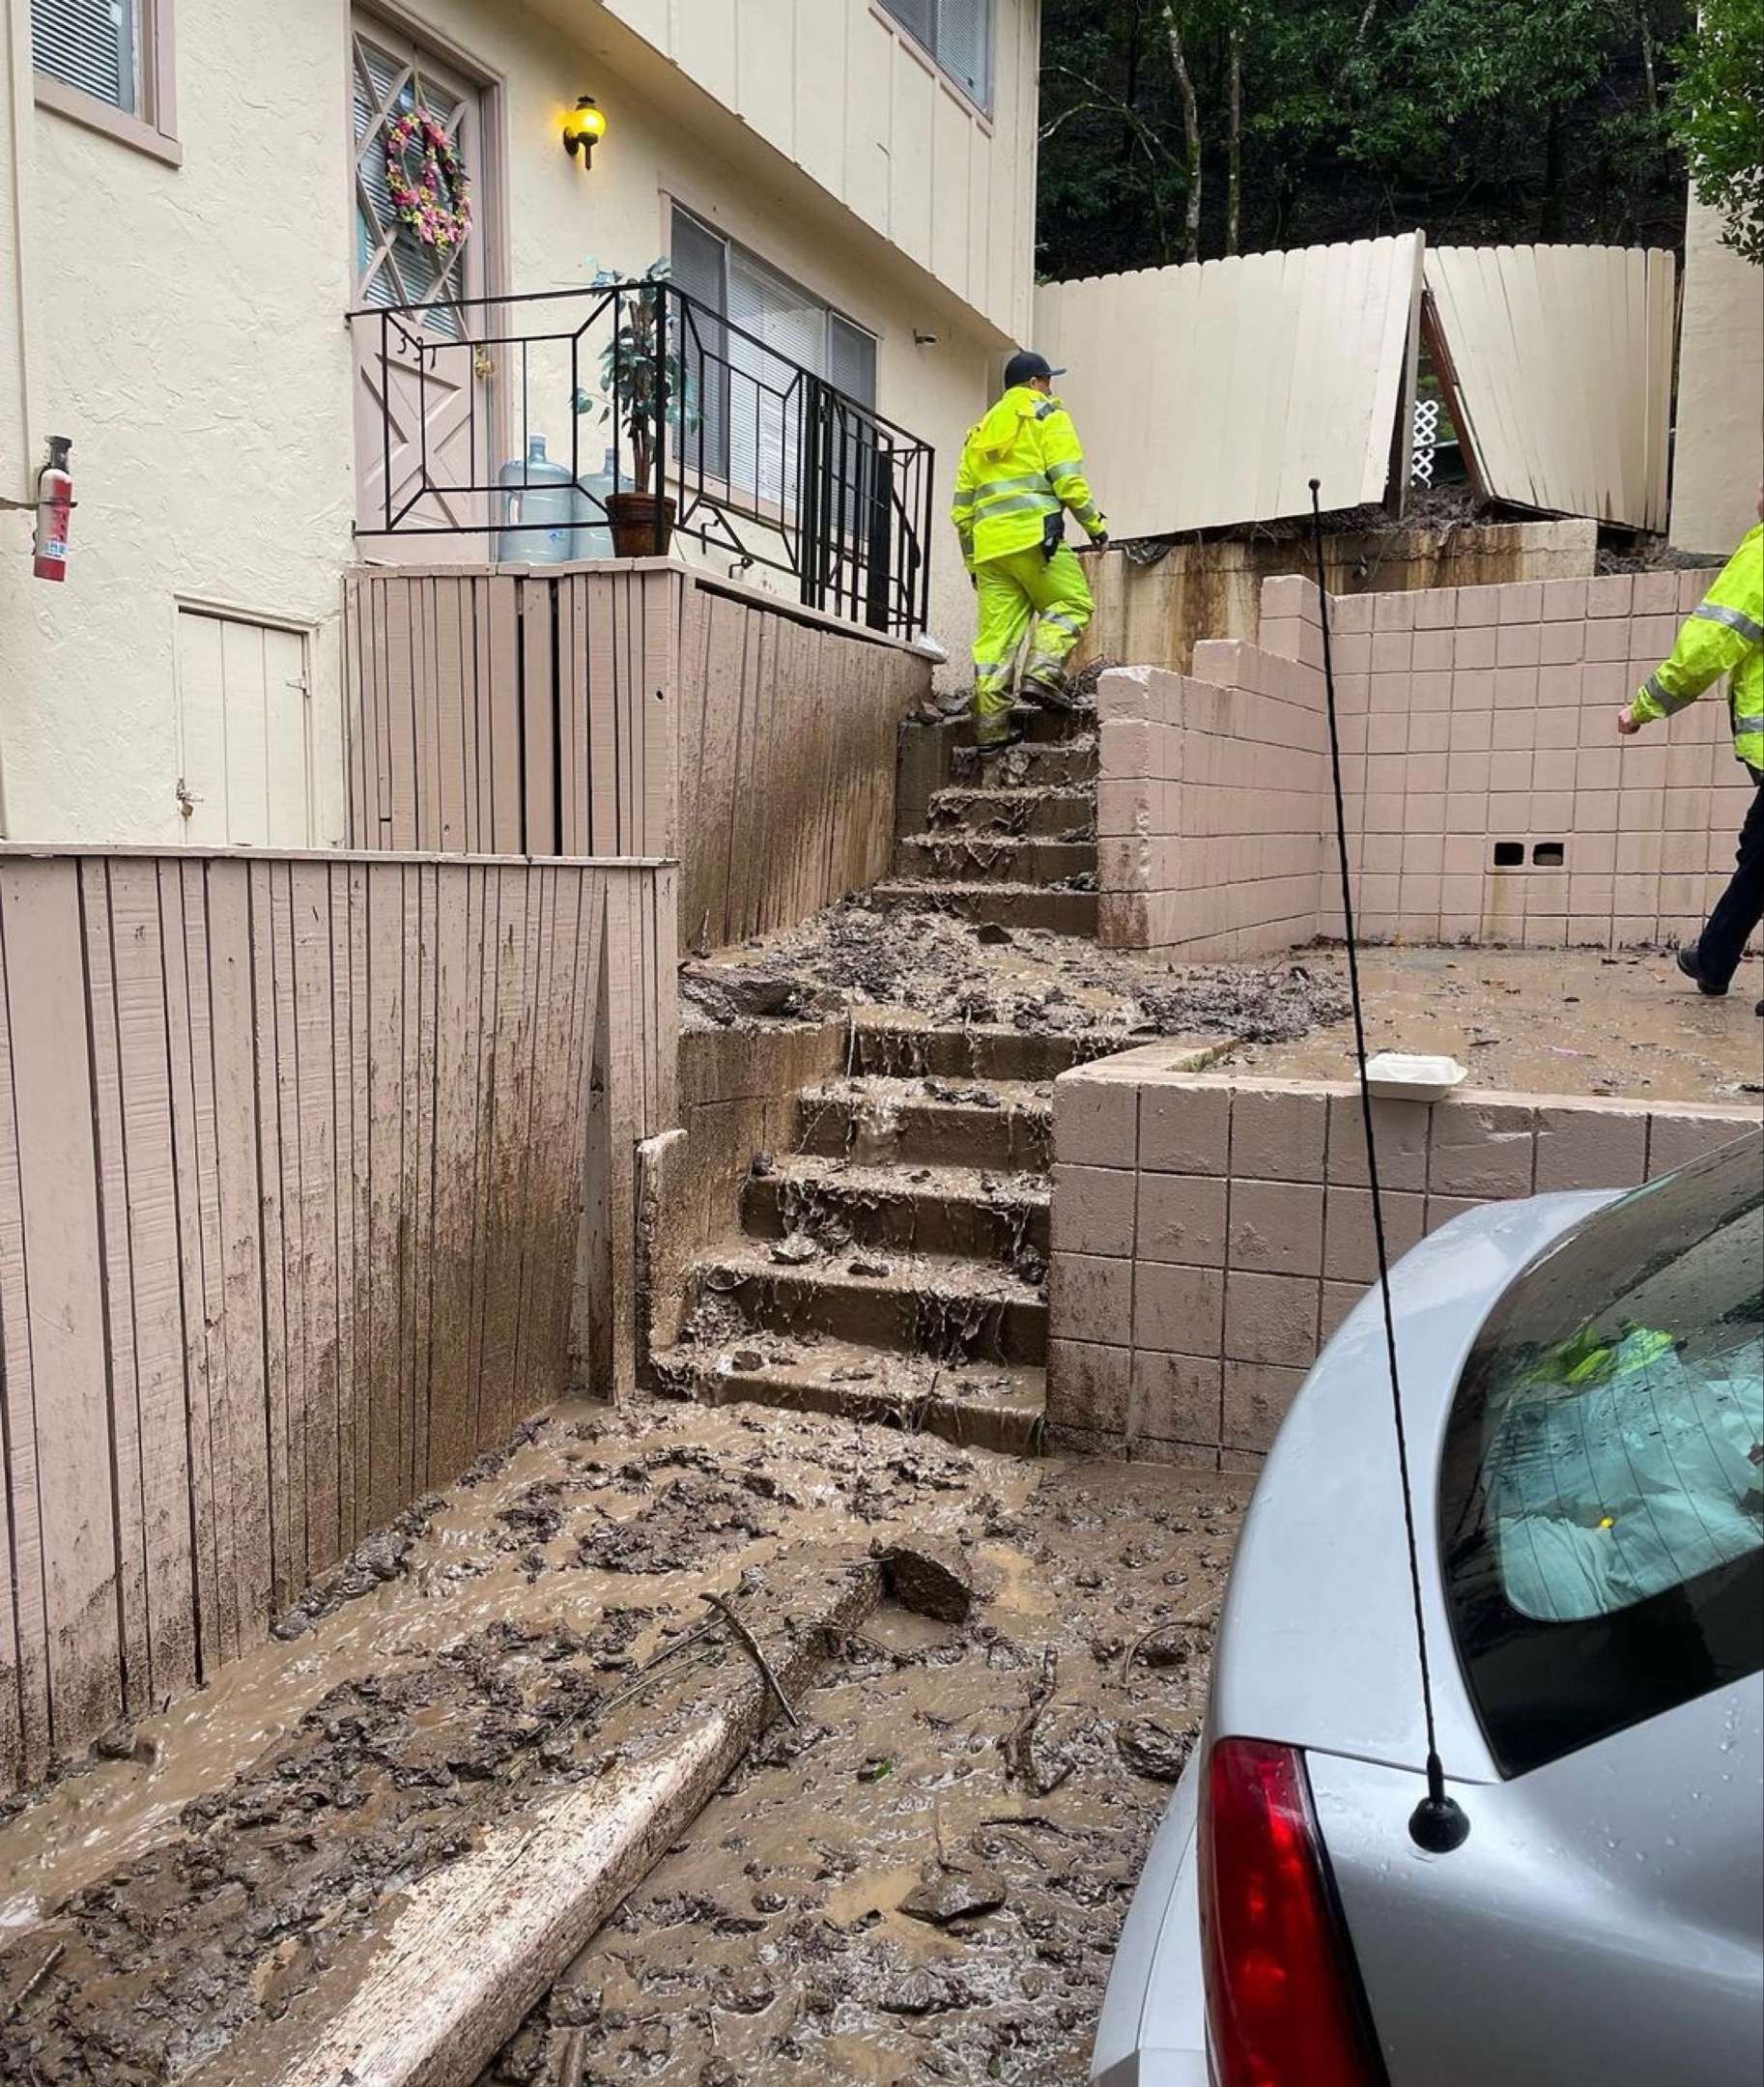 A firefighter walks up the exterior stairs at an apartment complex covered in mud from a storm.